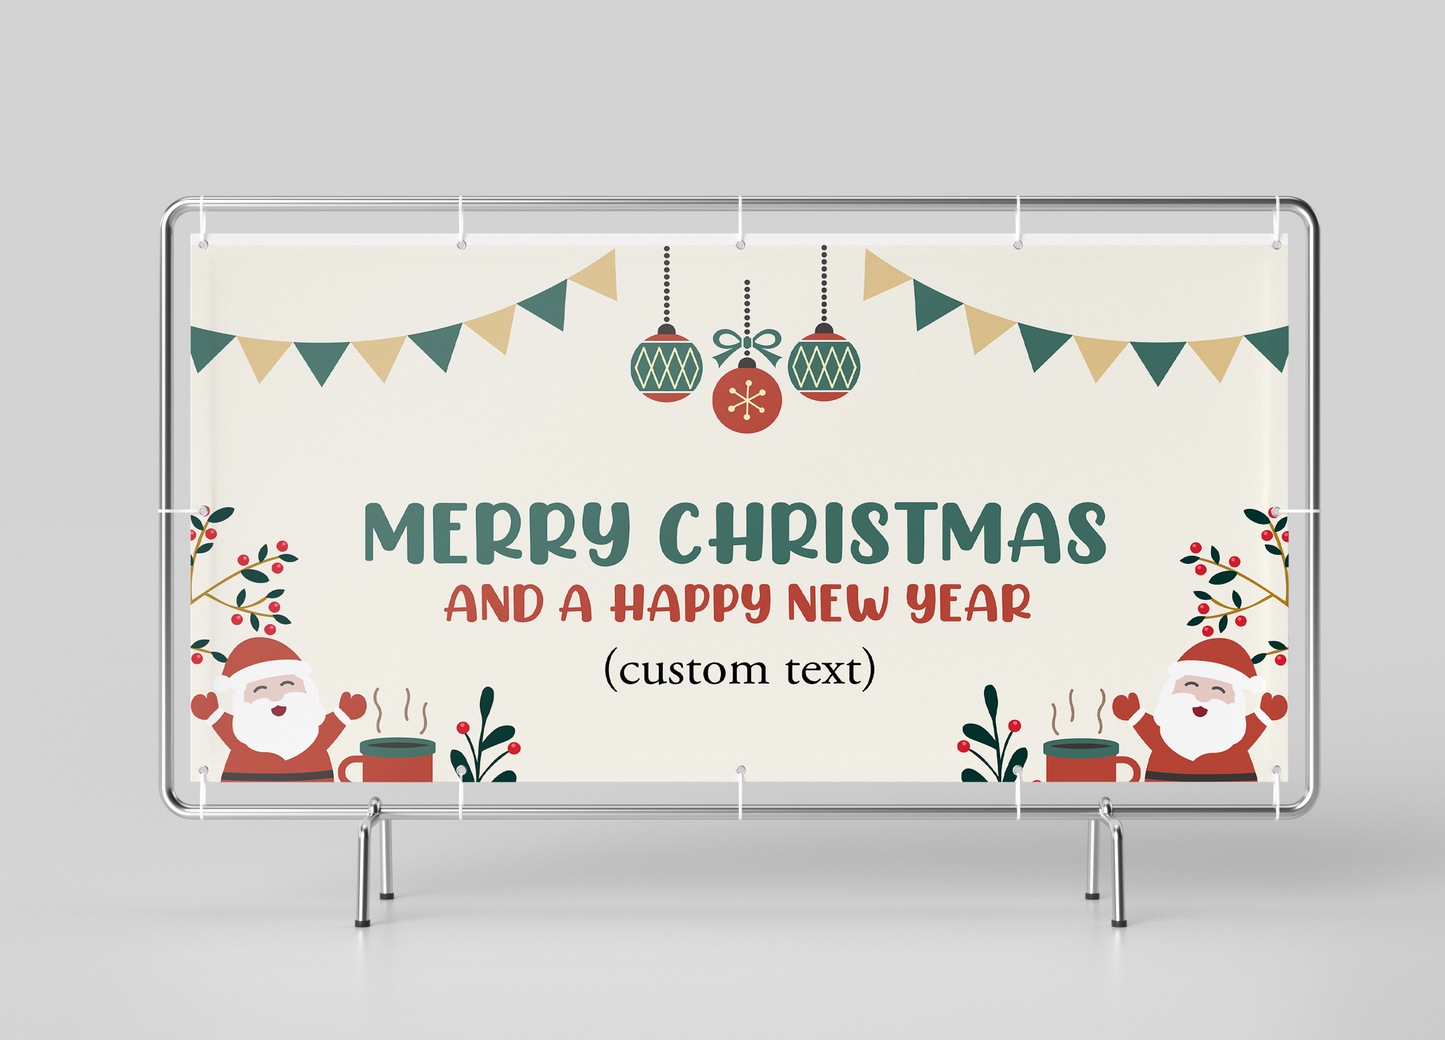 Merry Christmas and a Happy New Year Banner